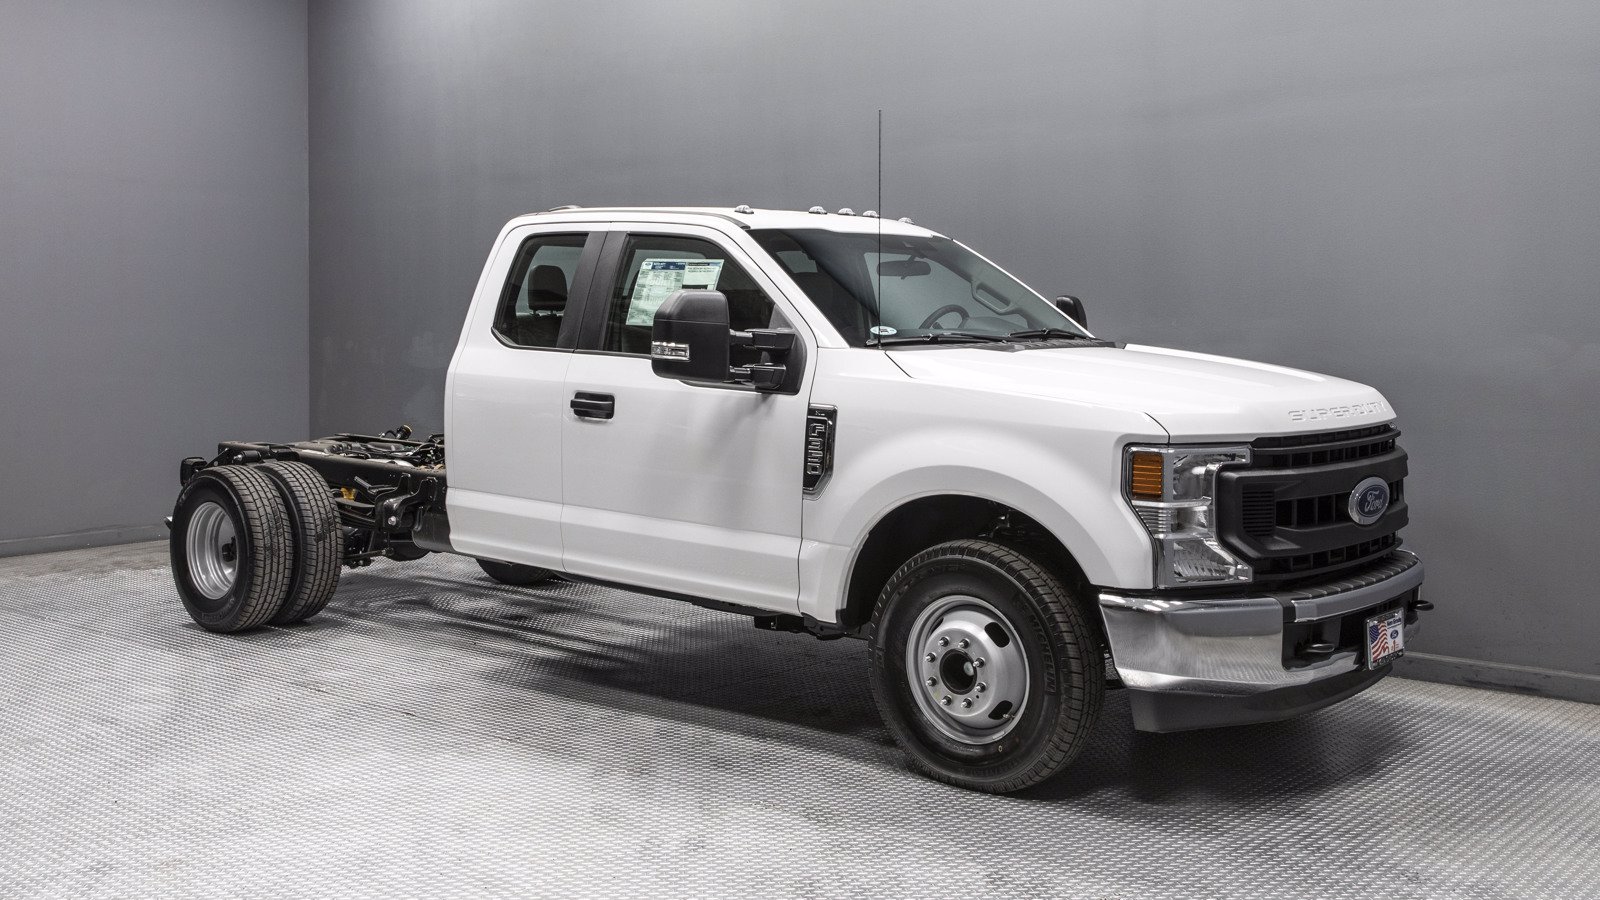 New 2020 Ford Super Duty F350 DRW XL Extended Cab ChassisCab in